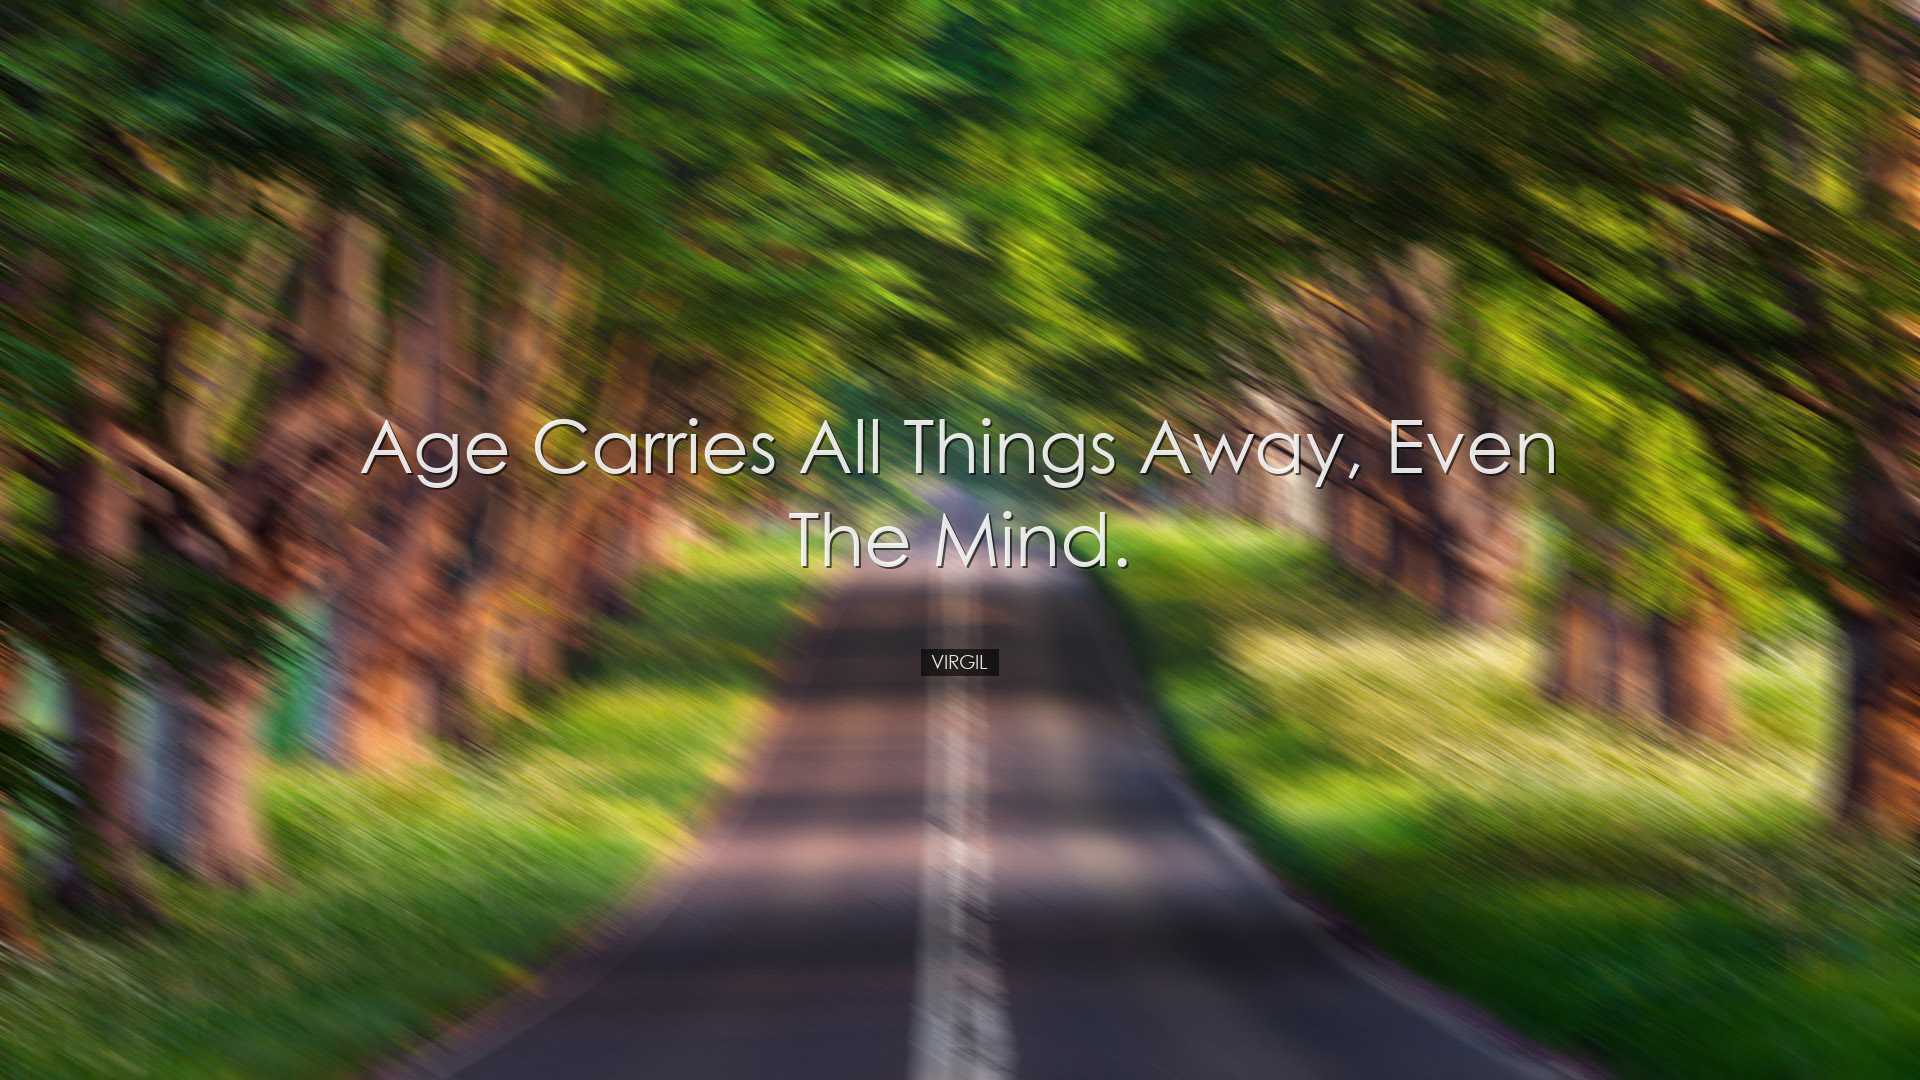 Age carries all things away, even the mind. - Virgil